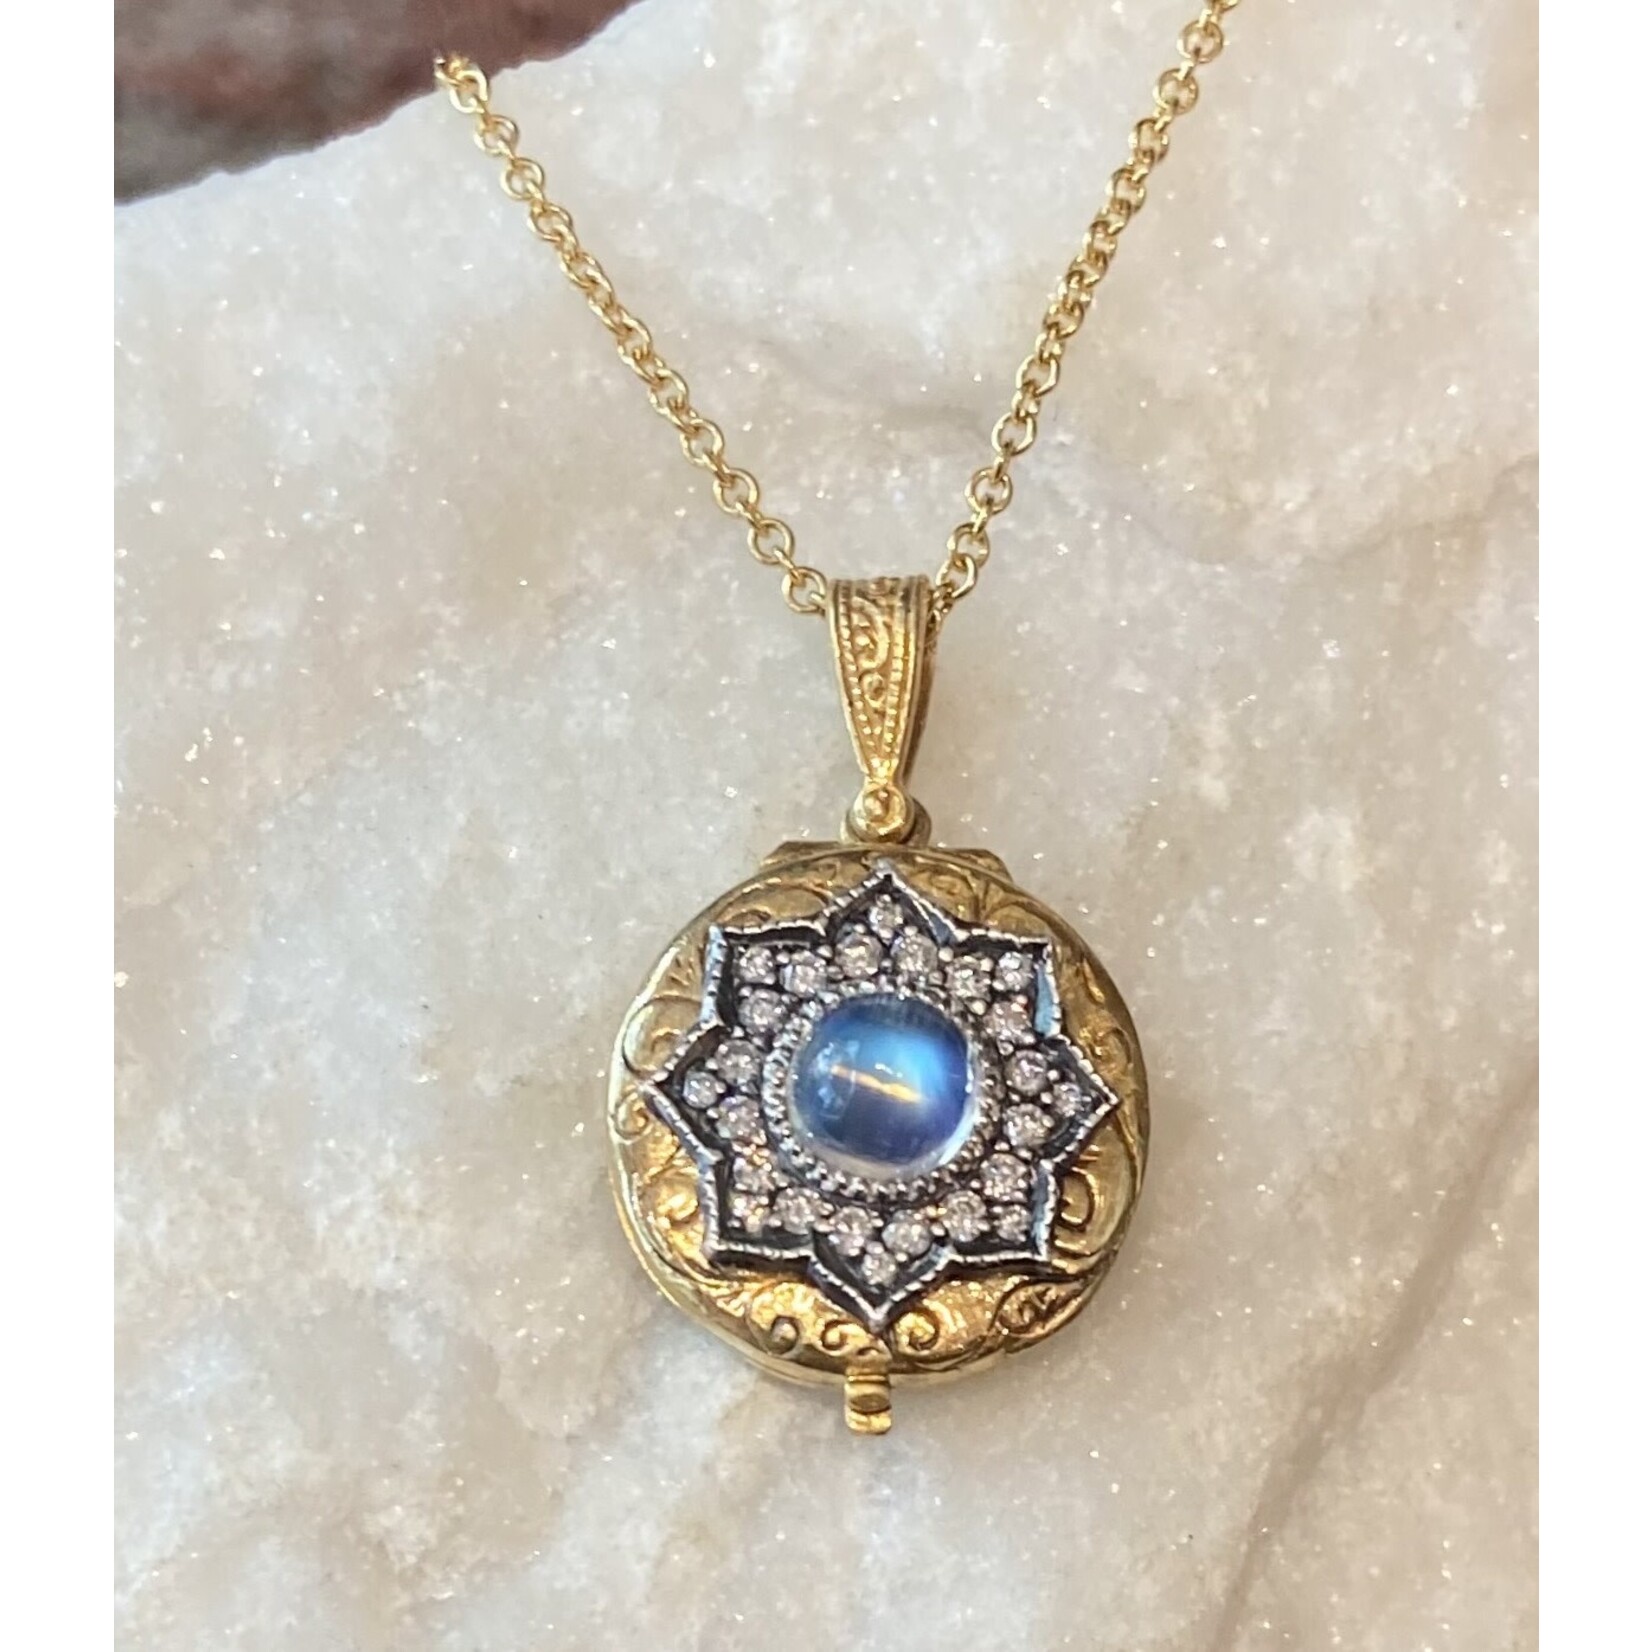 Arman Jewelry 22k Gold and Moonstone Flower Locket Necklace